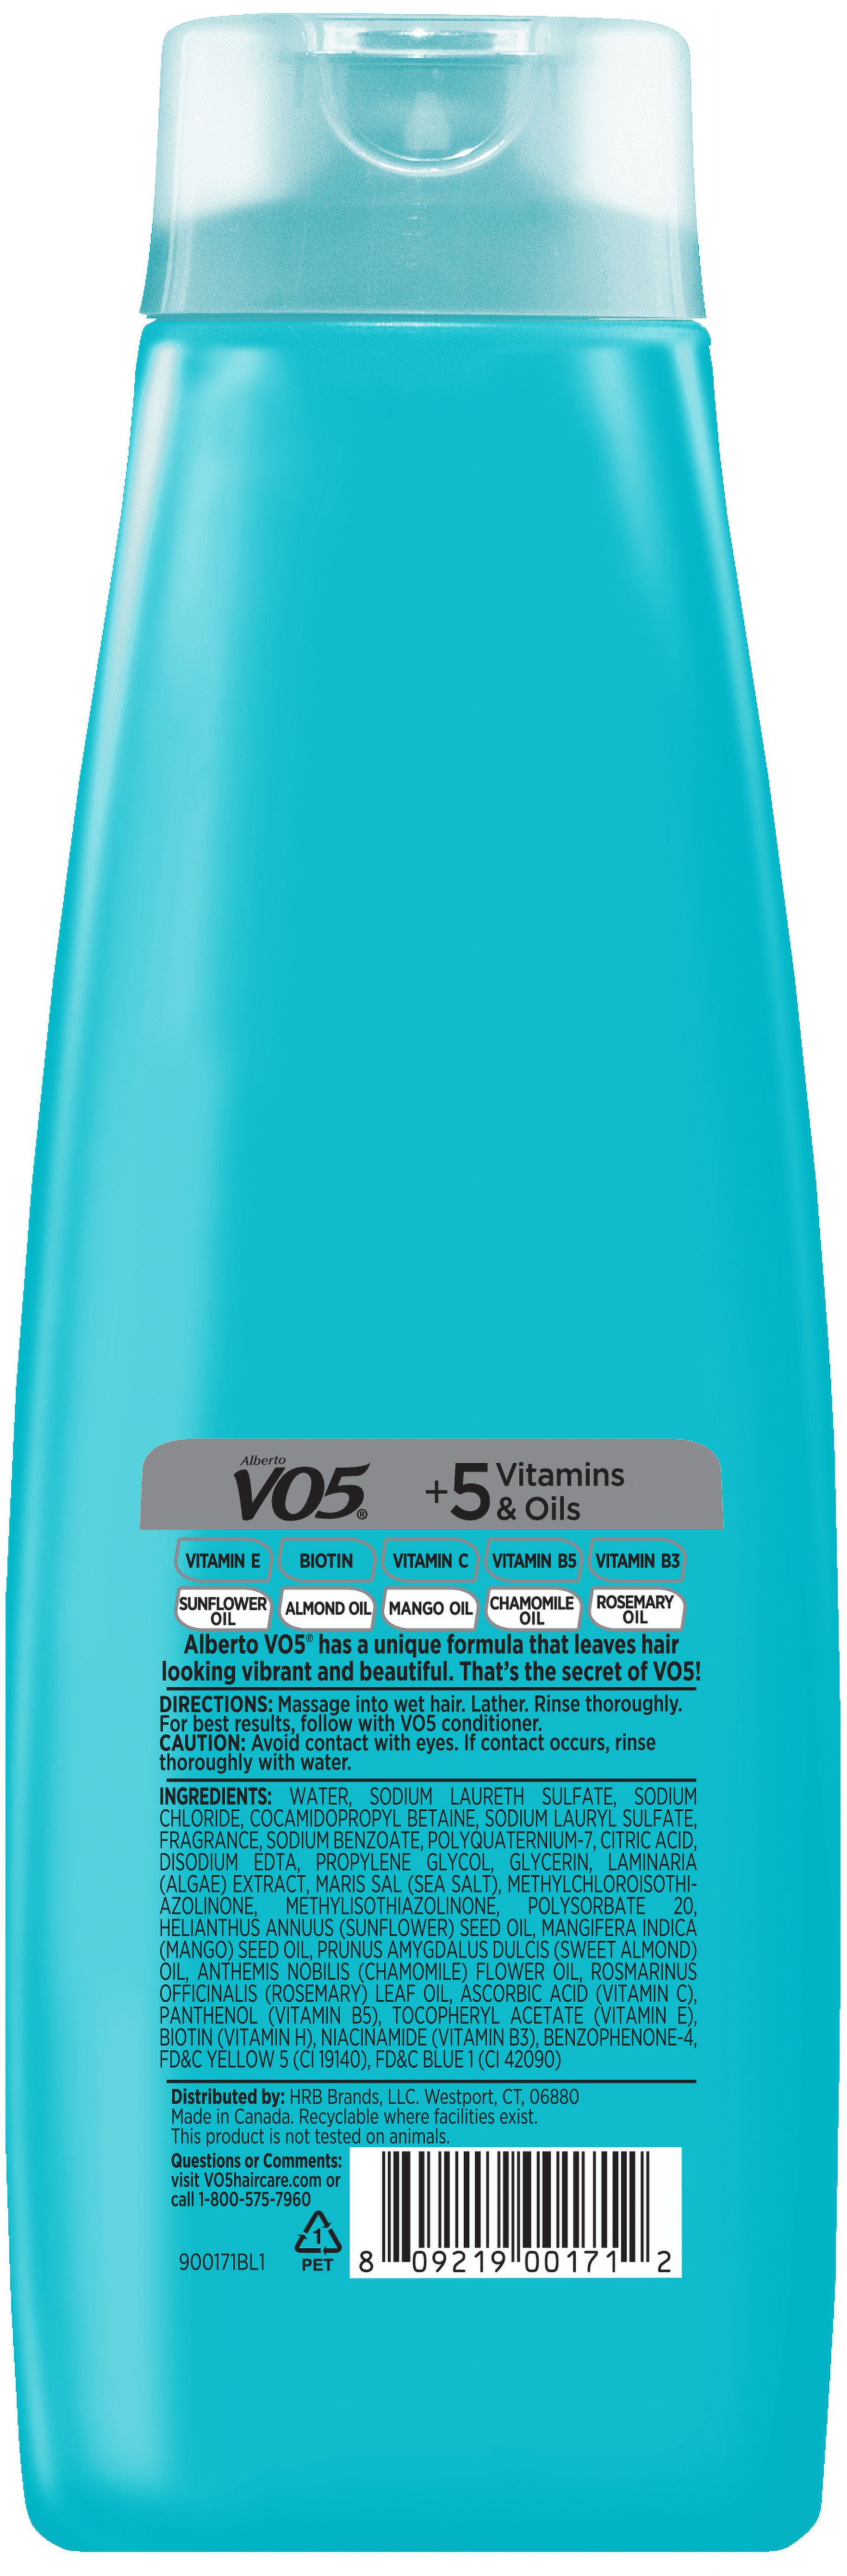 Alberto VO5 Ocean Refresh Revitalizing Shampoo with Sea Minerals, for All Hair Types, 16.9 oz - image 2 of 6